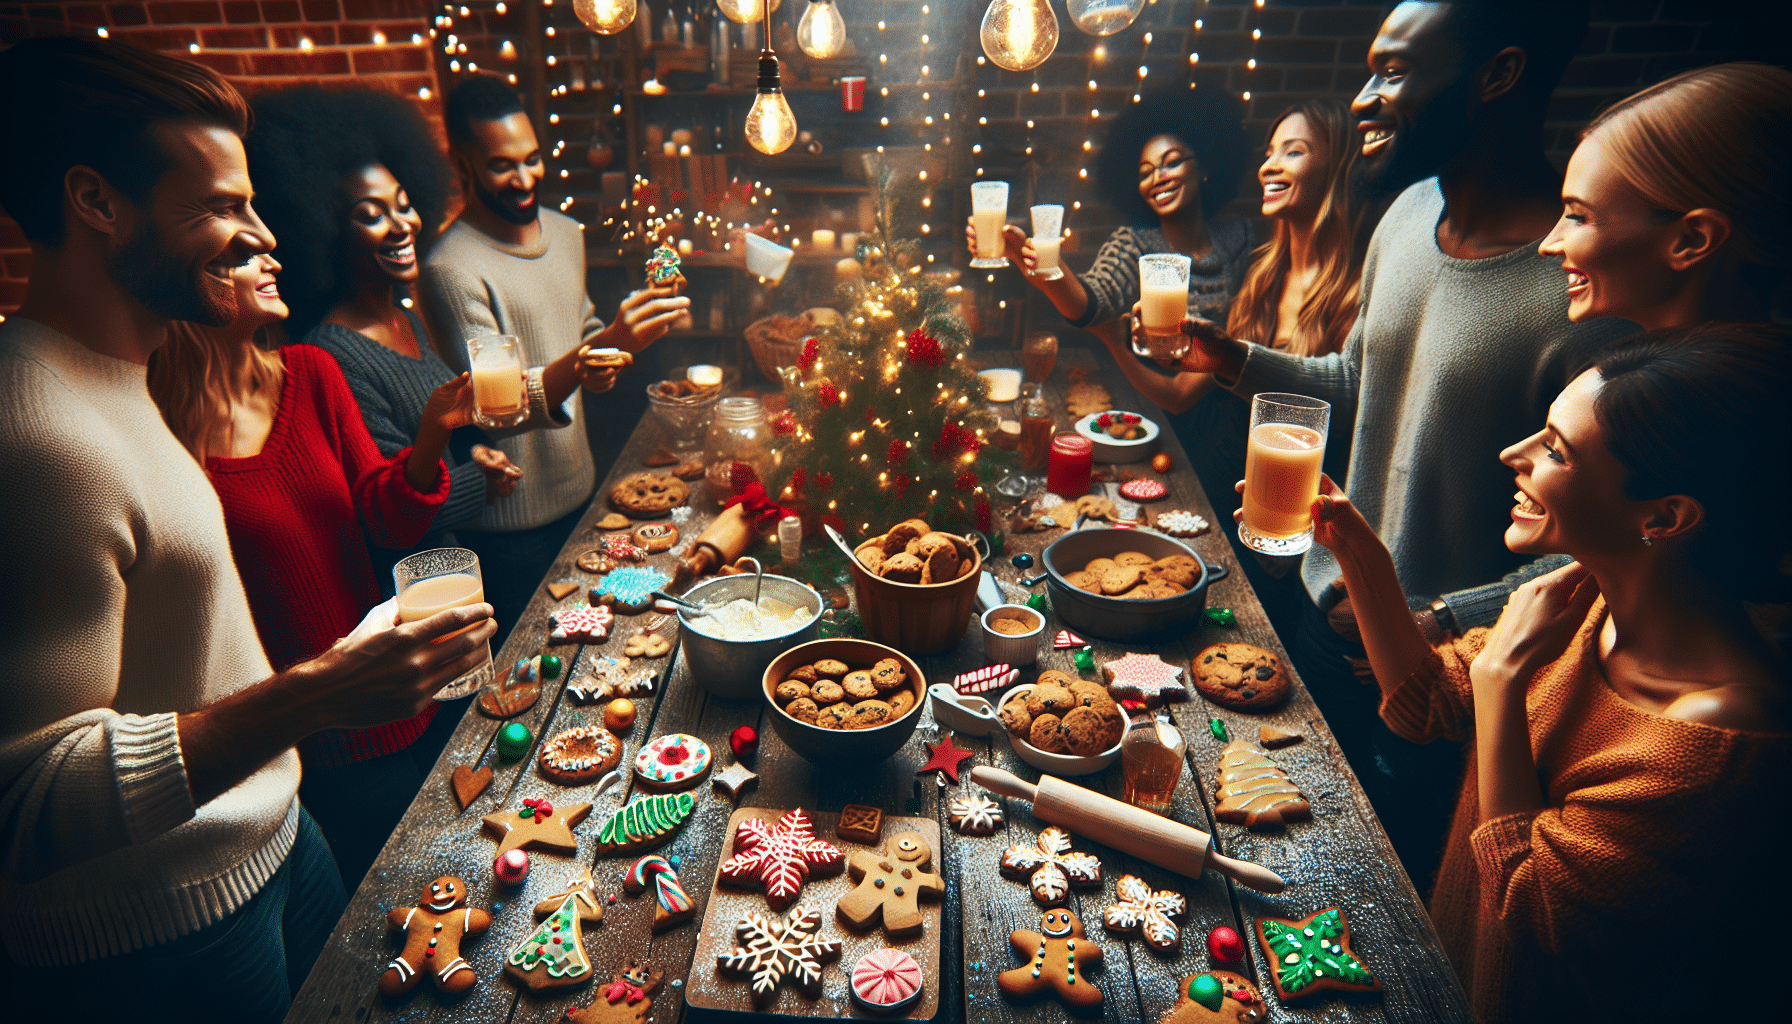 Hosting a Festive Holiday Cookie Exchange Party